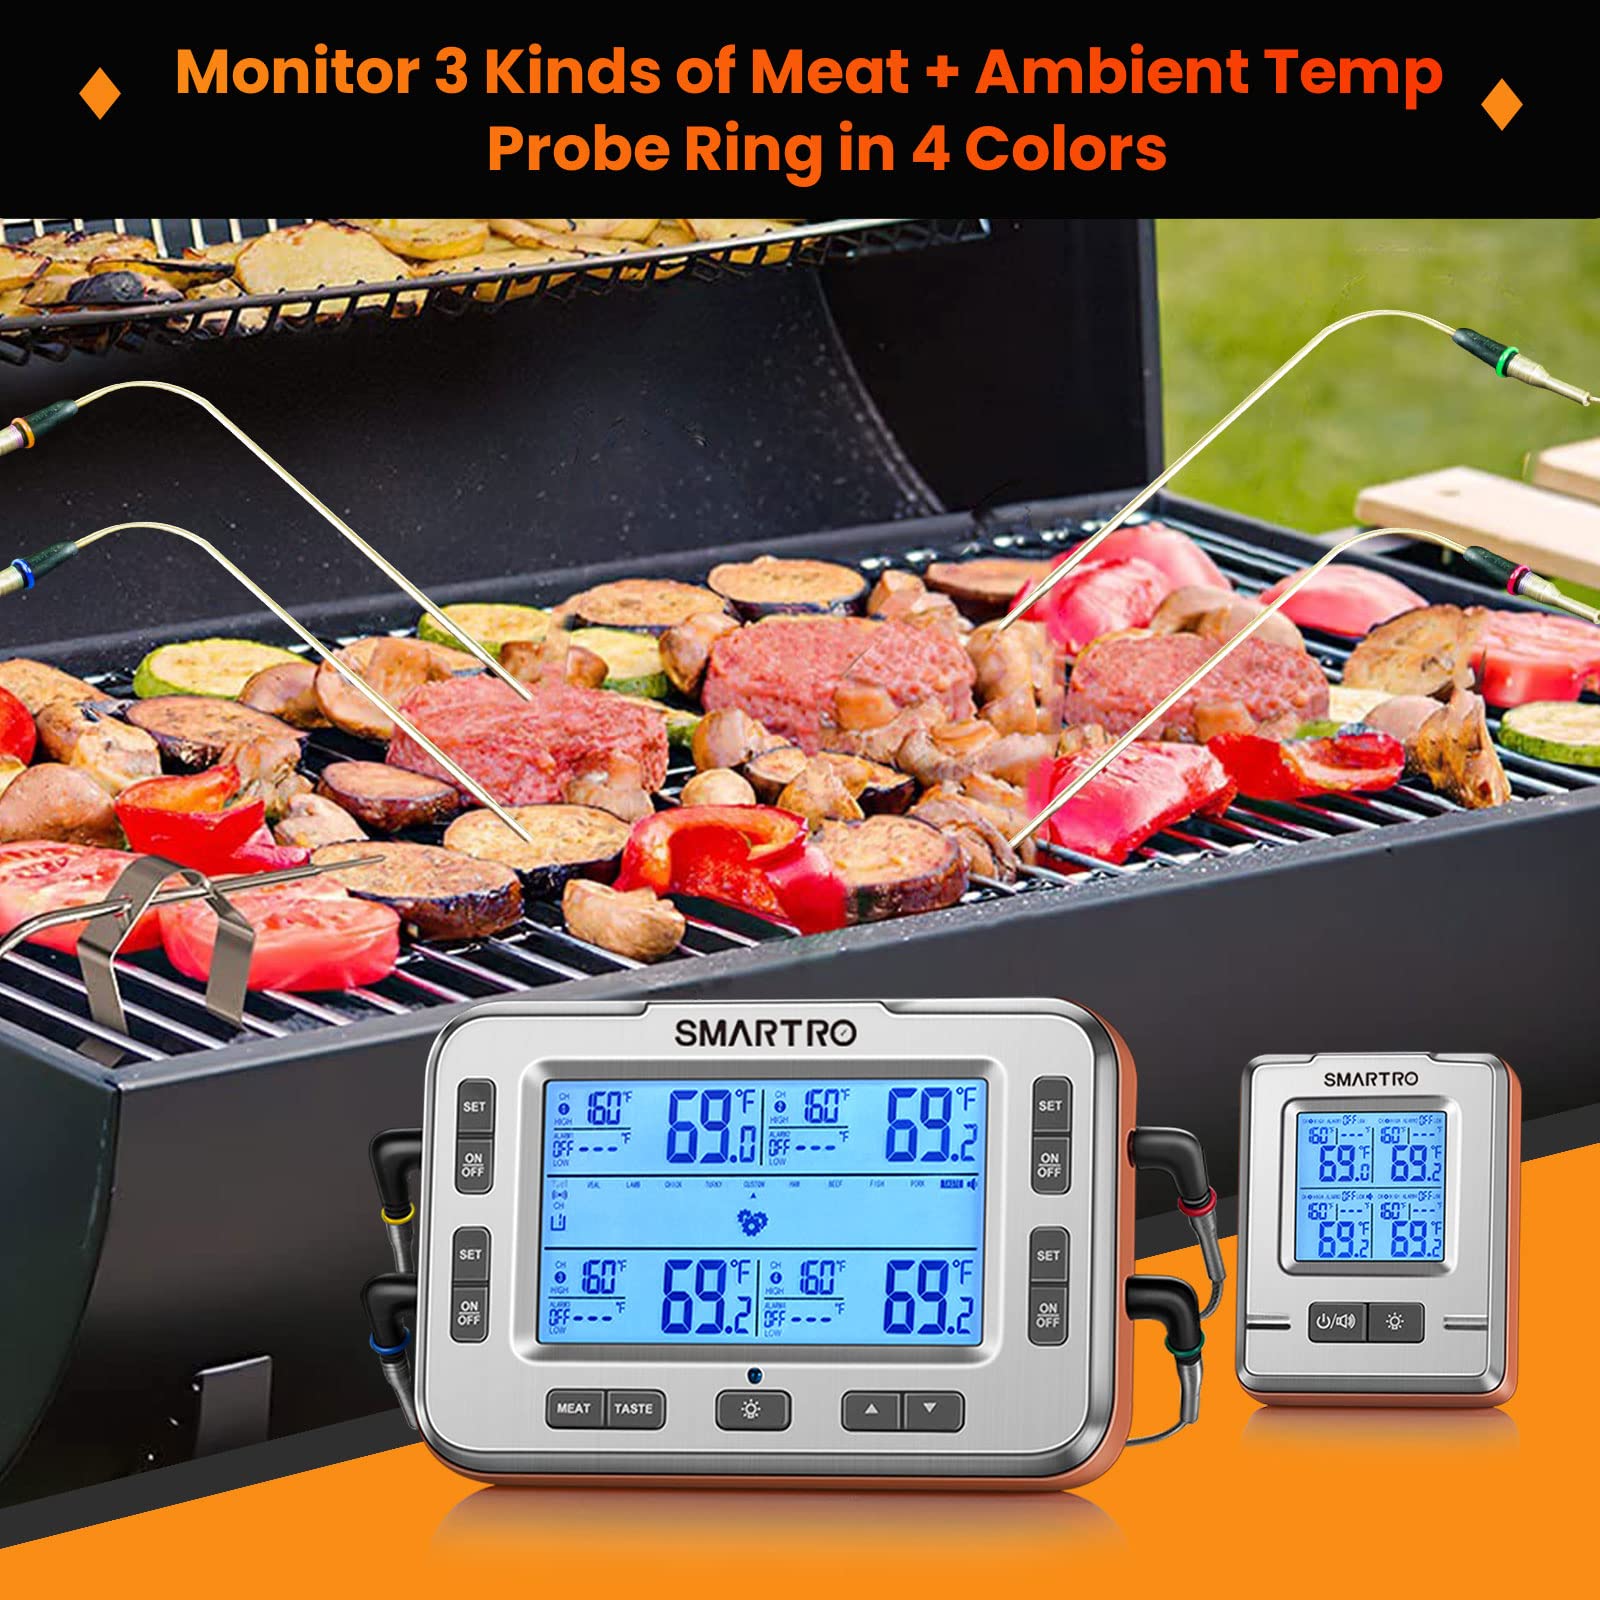 SMARTRO X50 Digital Wireless Meat Thermometer 4 Probes, 500ft Food Temp Monitoring Range for BBQ Grilling Smoker & Kitchen Cooking with Smart Alarm